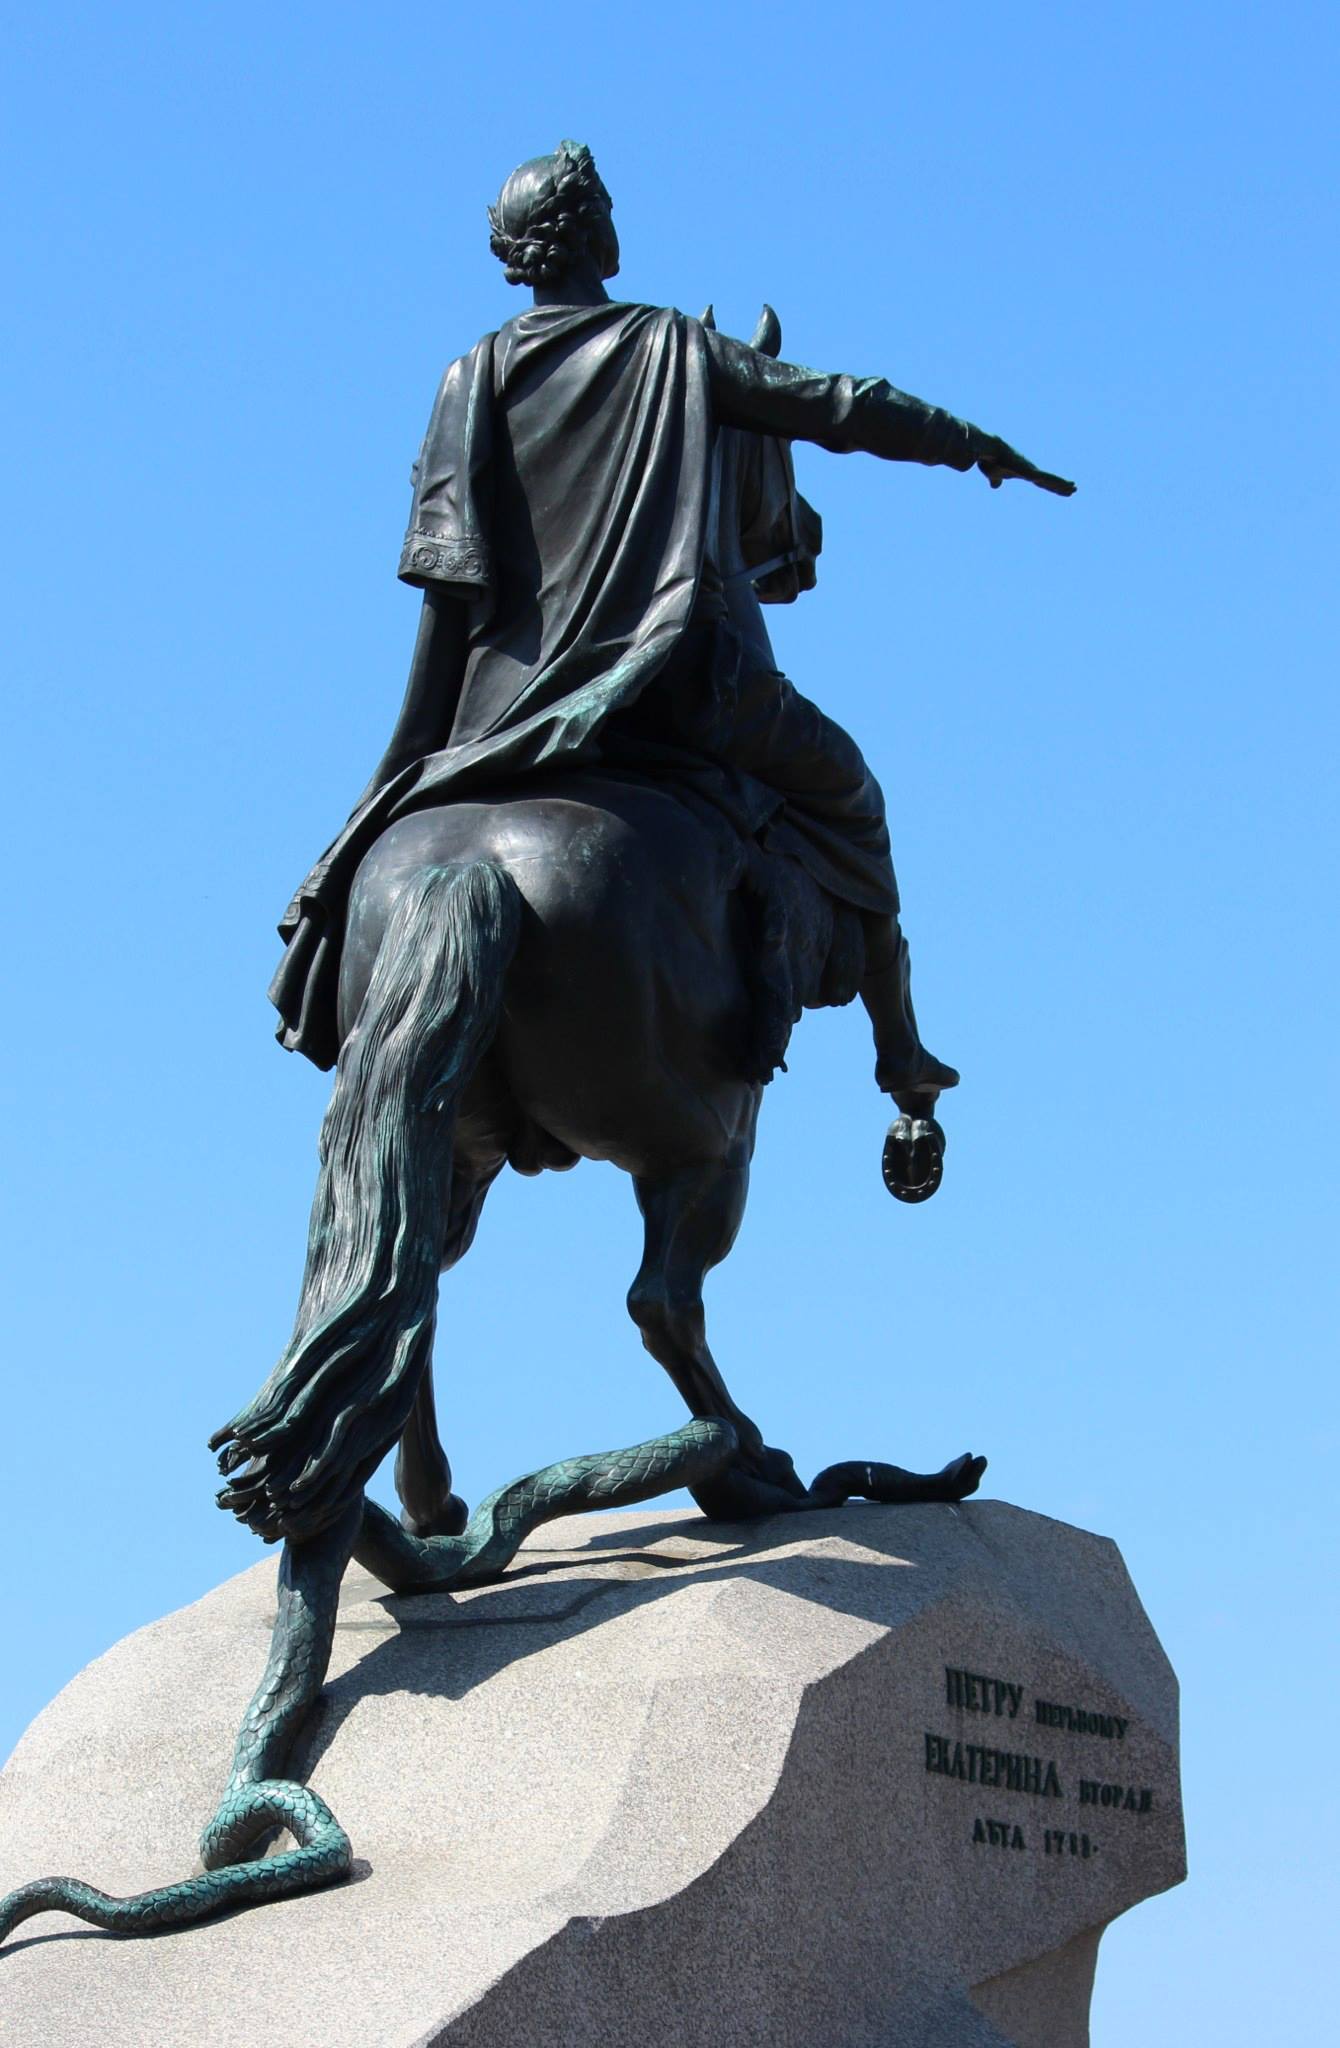 The famous statue of Peter the Great, “The Bronze Horseman."